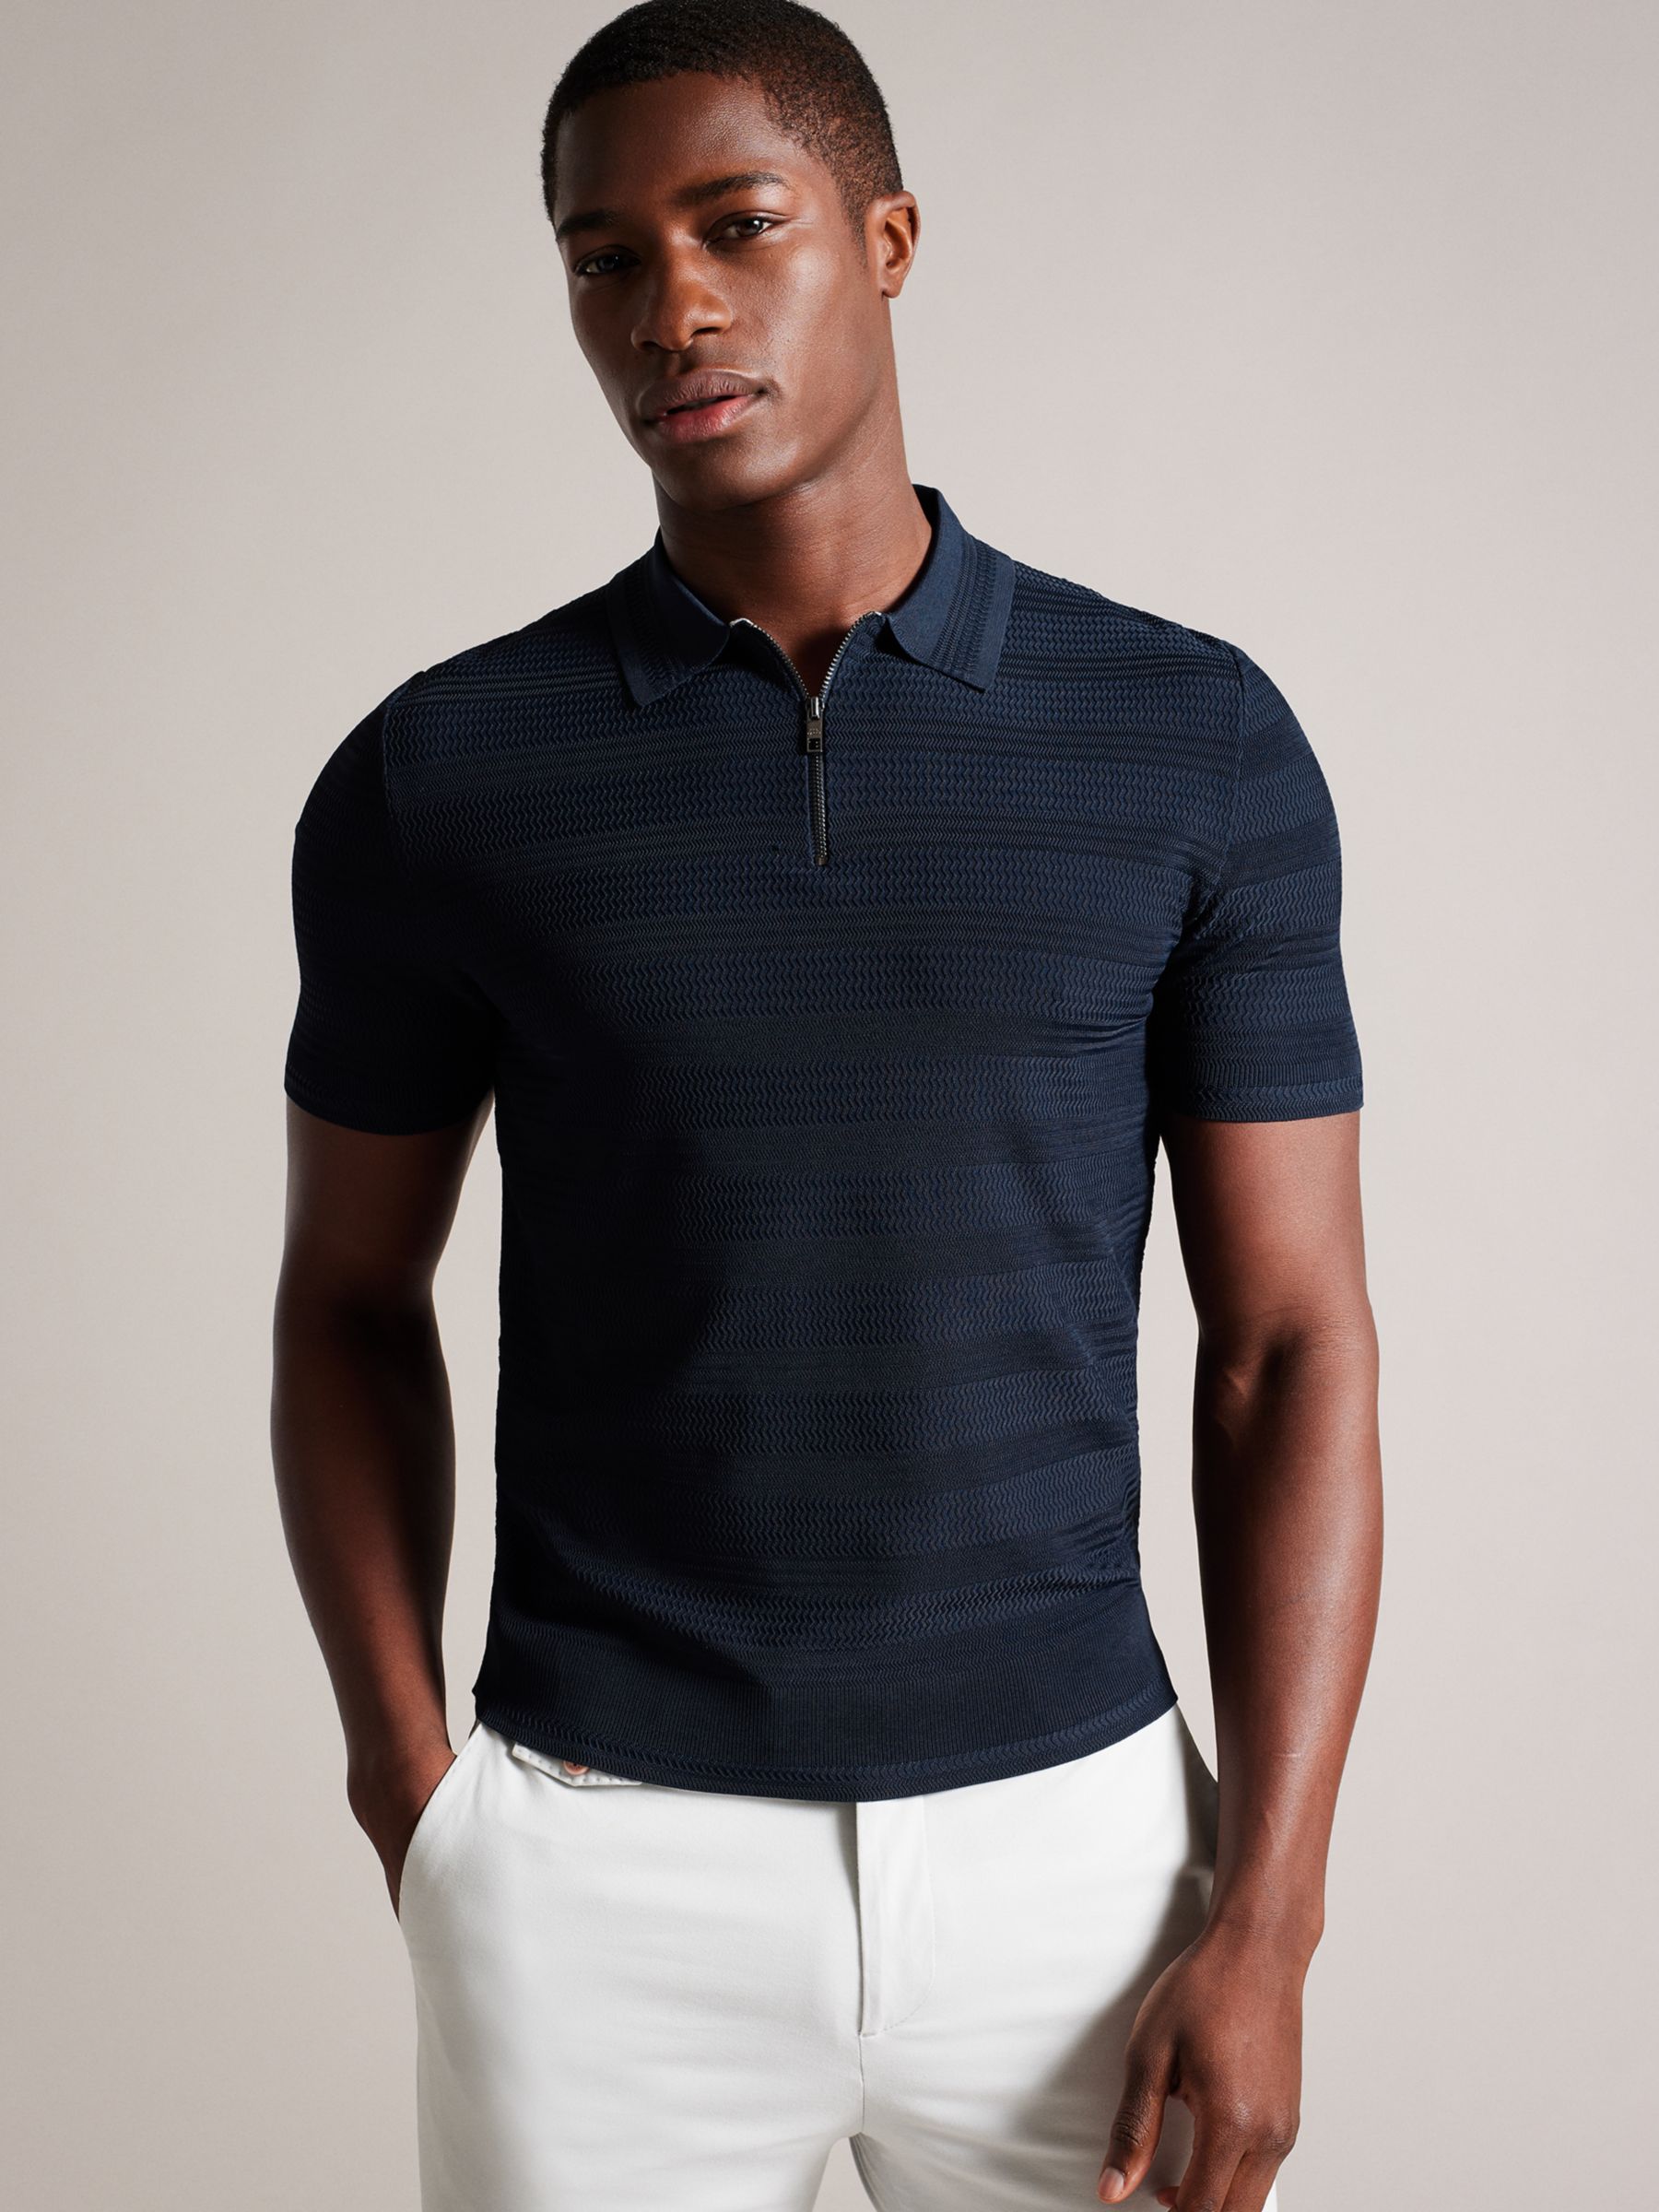 Ted Baker Stree Textured Knit Polo Top, Navy at John Lewis & Partners